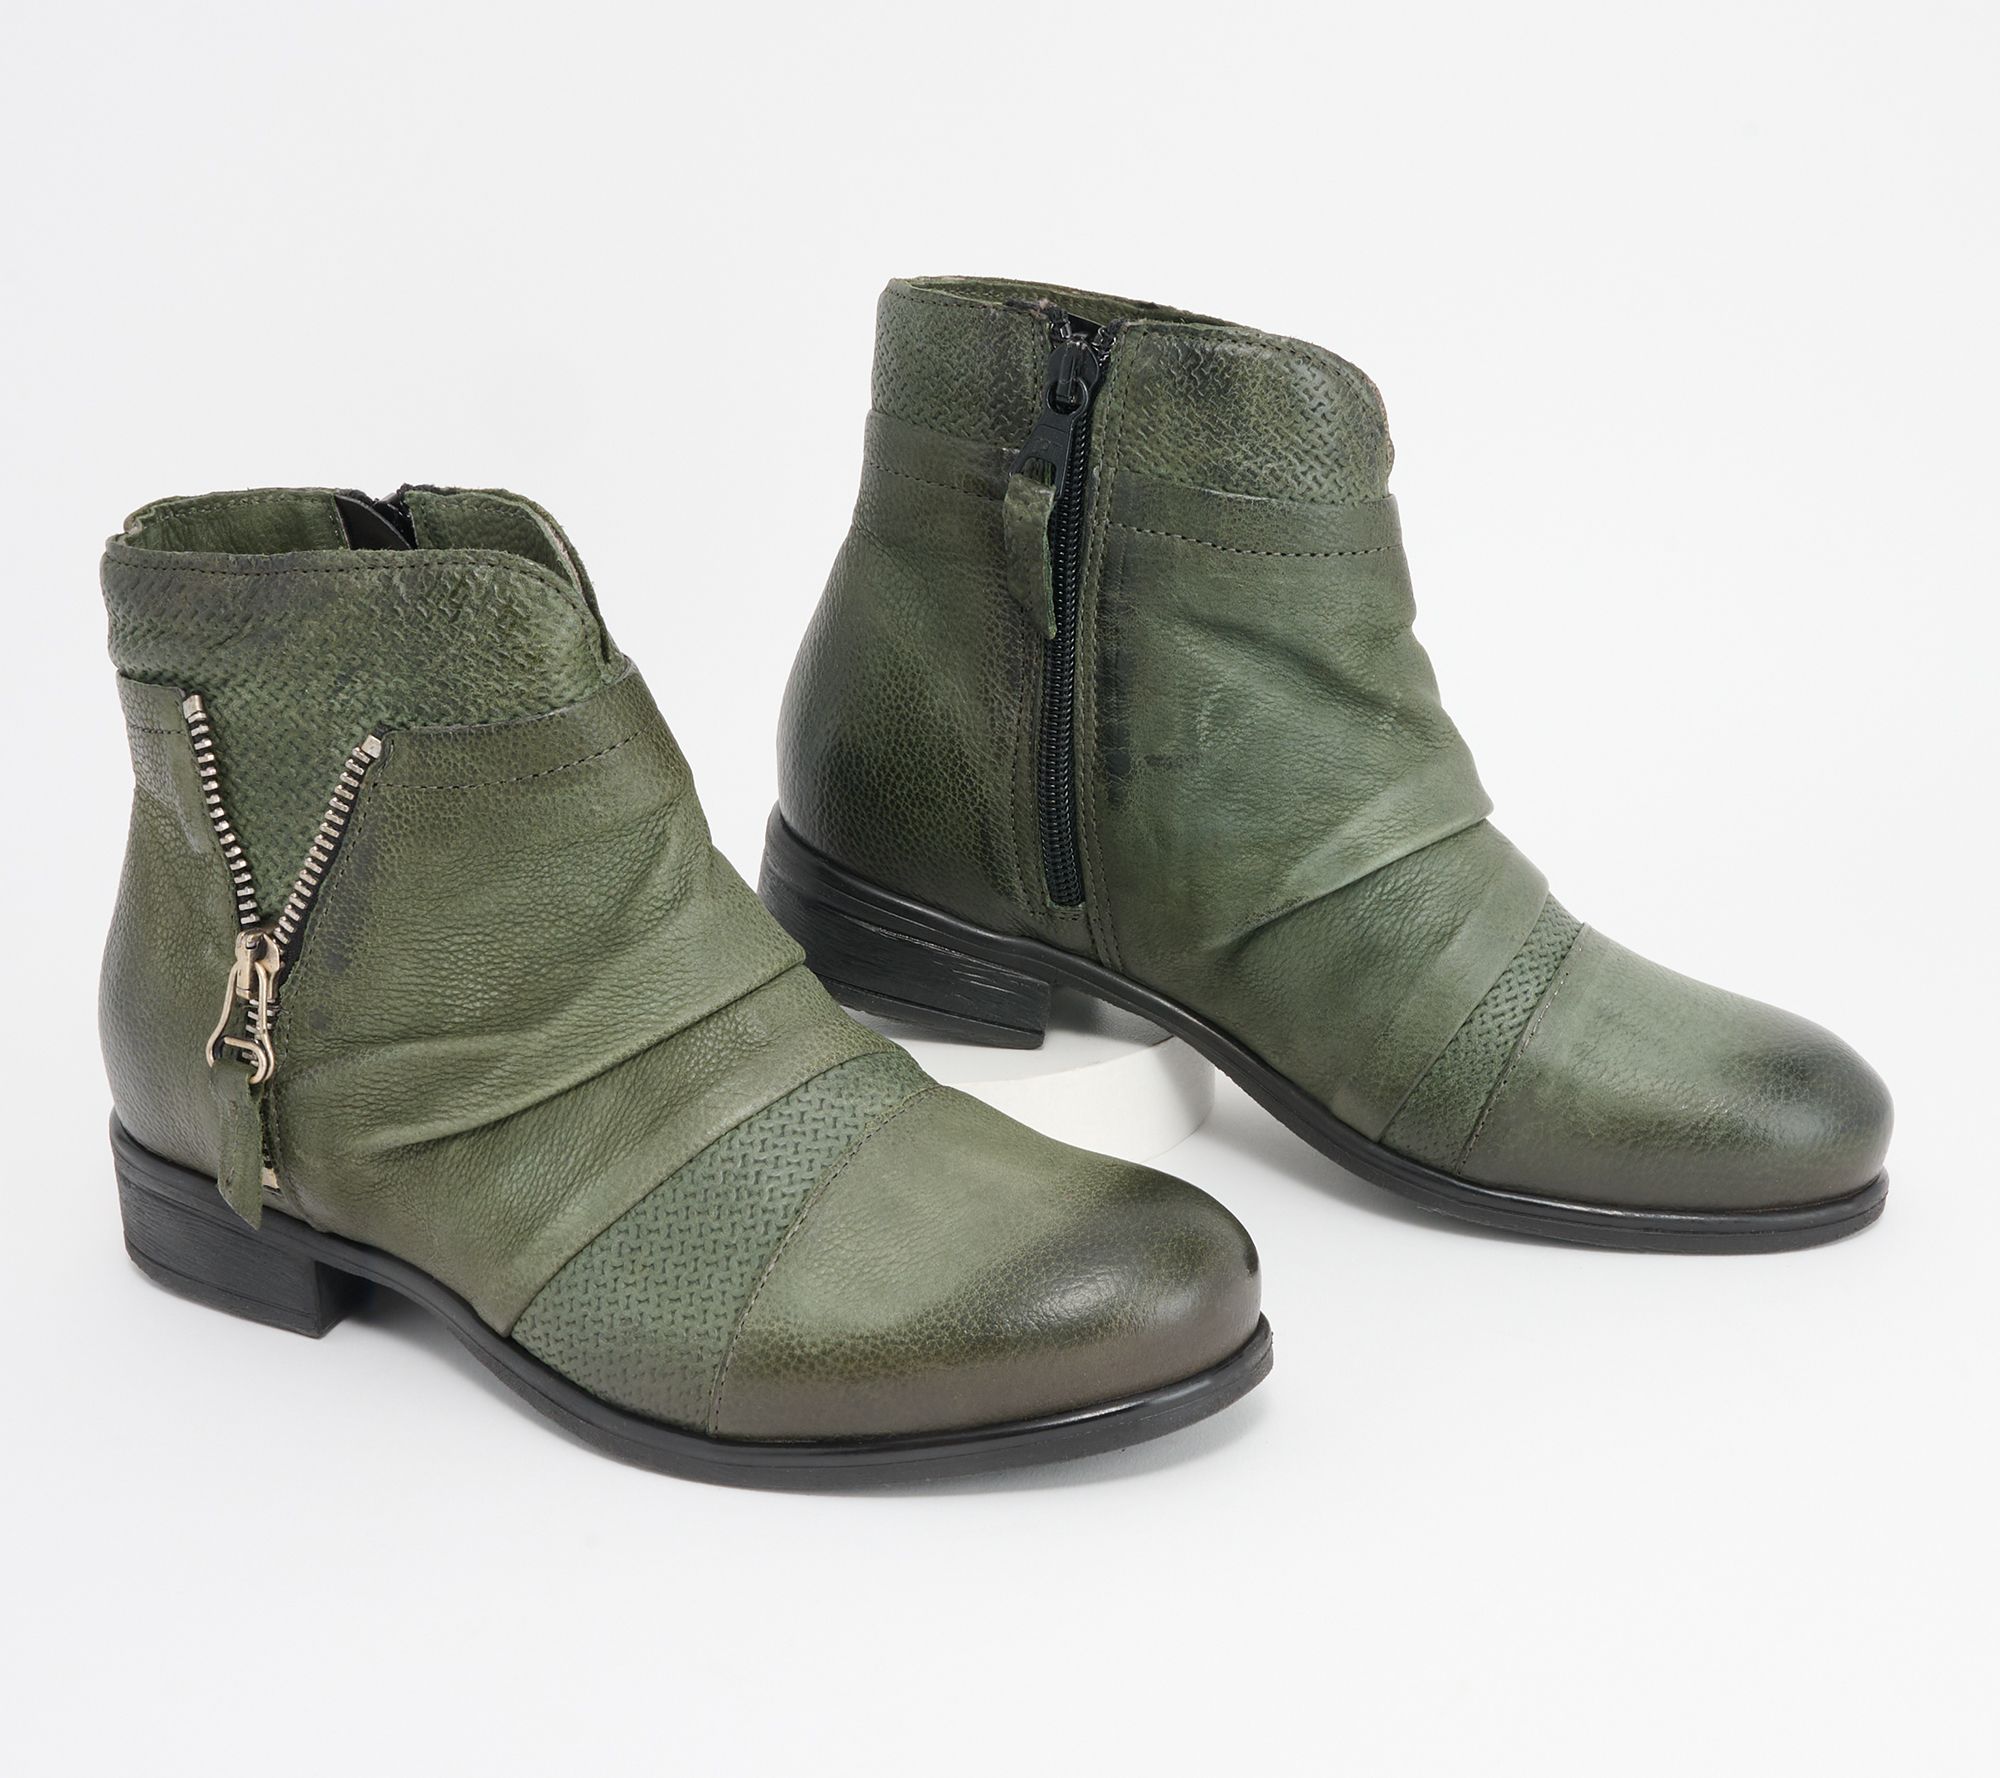 n.d.c. Claire Zip Booties Womens 8.5, 39 EU Olive Green Suede Leather Hand  Made